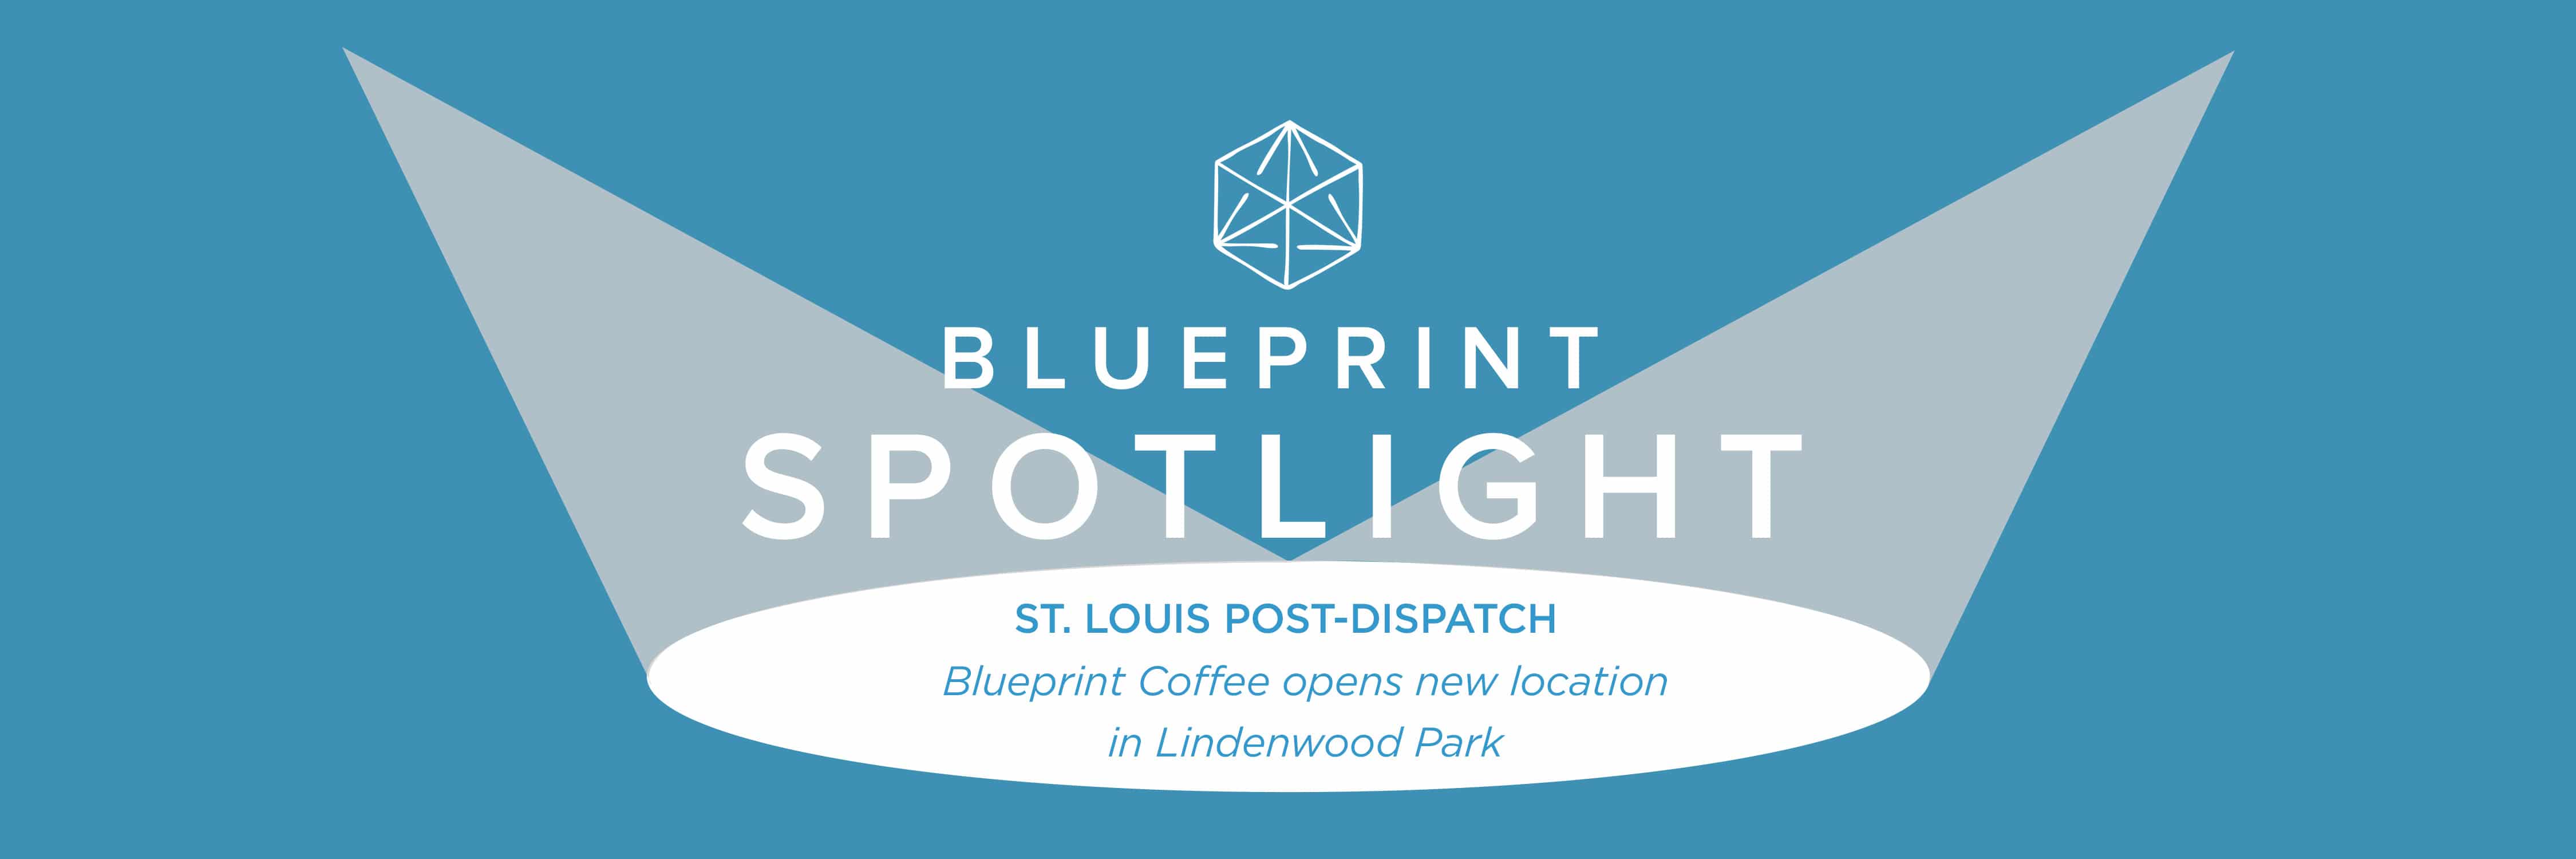 Blueprint Spotlight: Post-Dispatch covers the opening of the Watson location — Blueprint Coffee